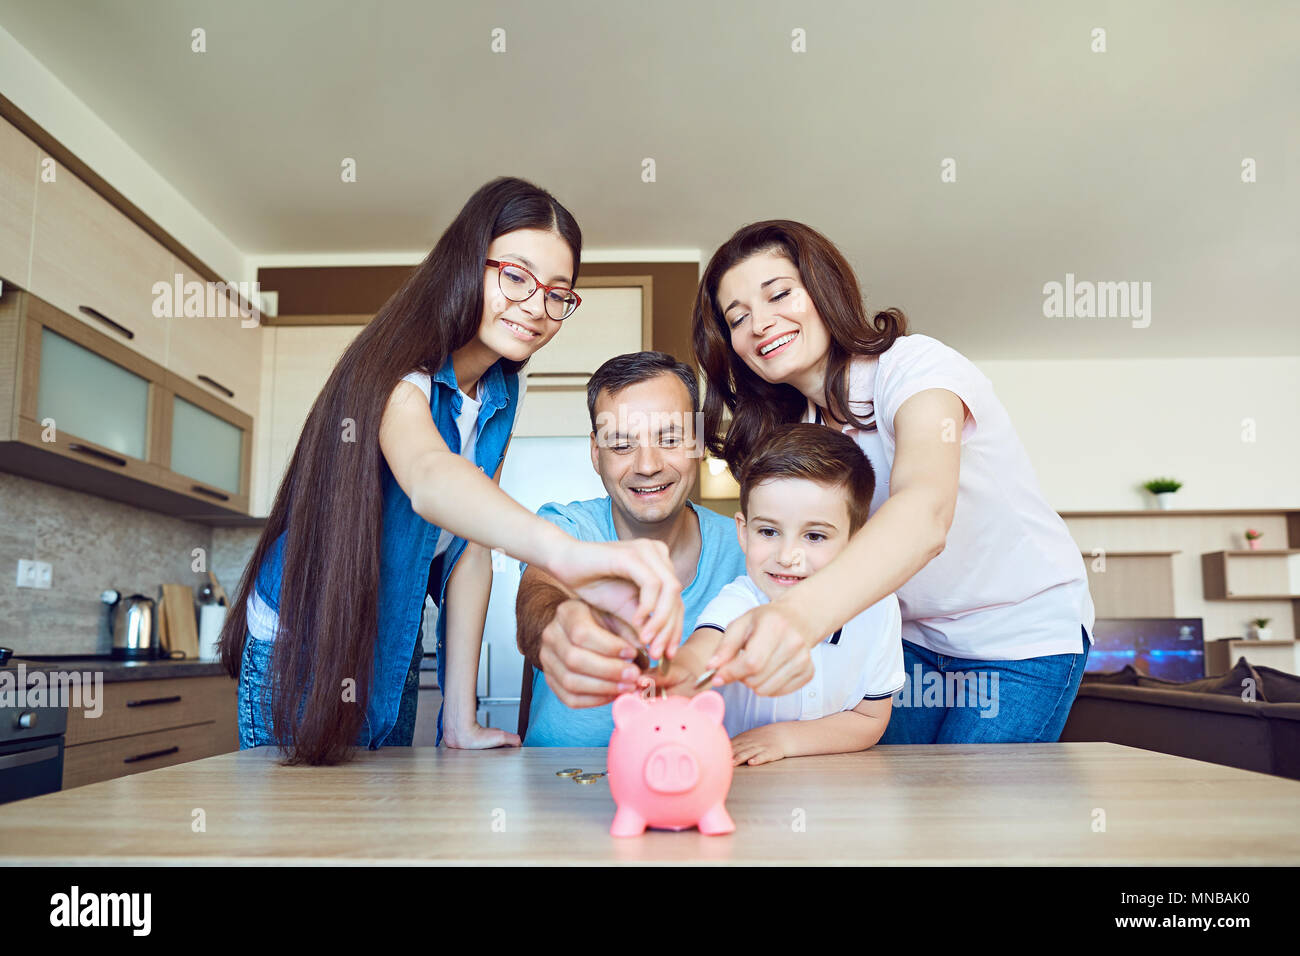 Happy family with pig piggy in the room.  Stock Photo